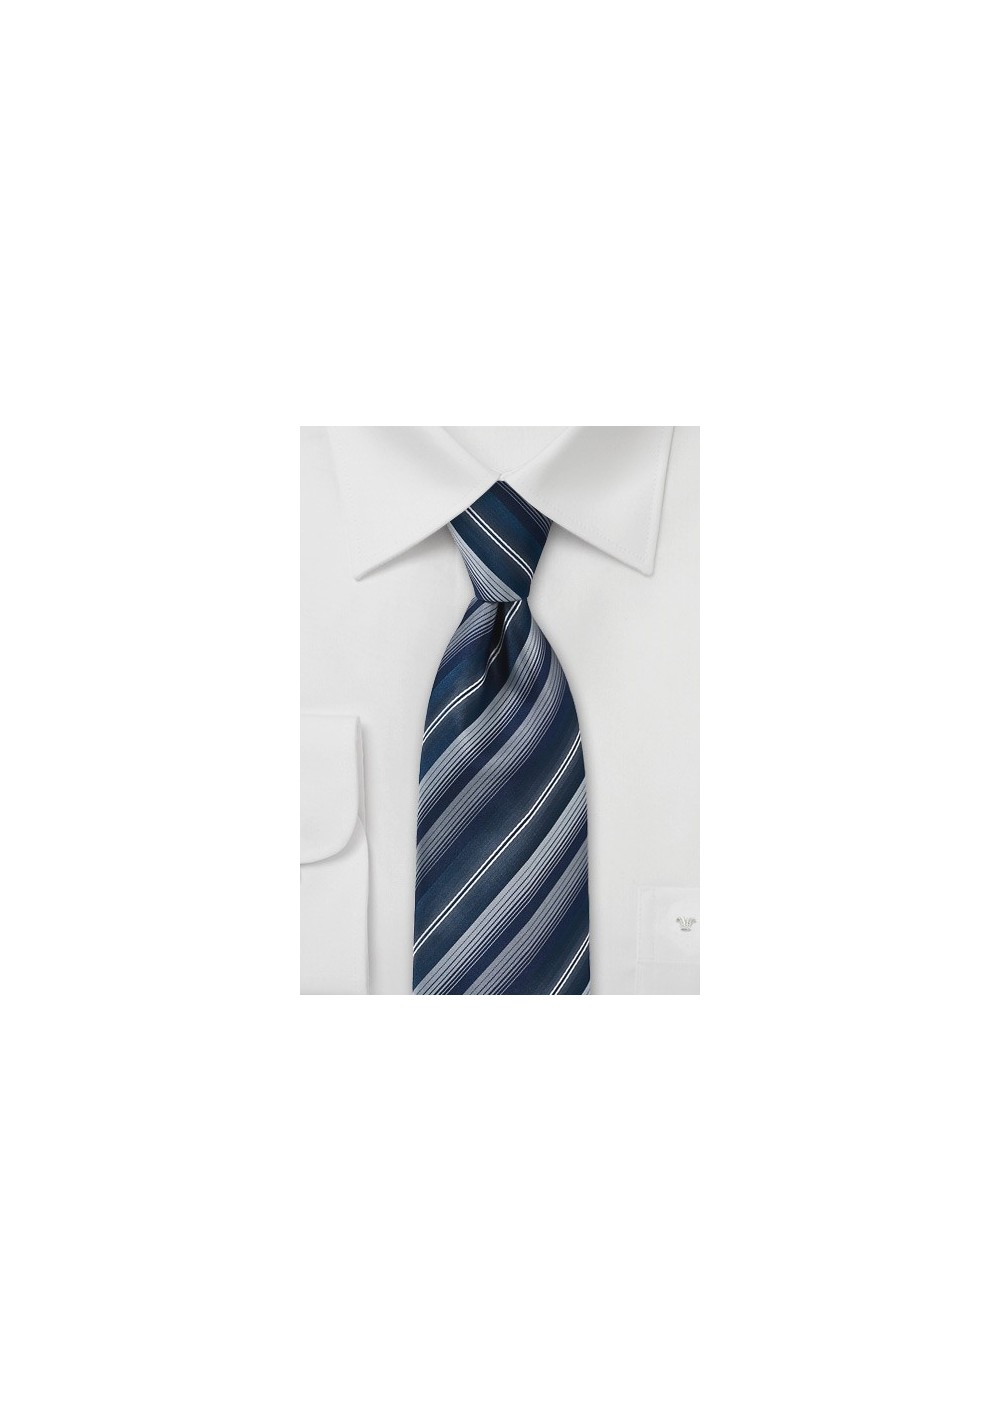 Graphic Tie in an Assortment of Blues